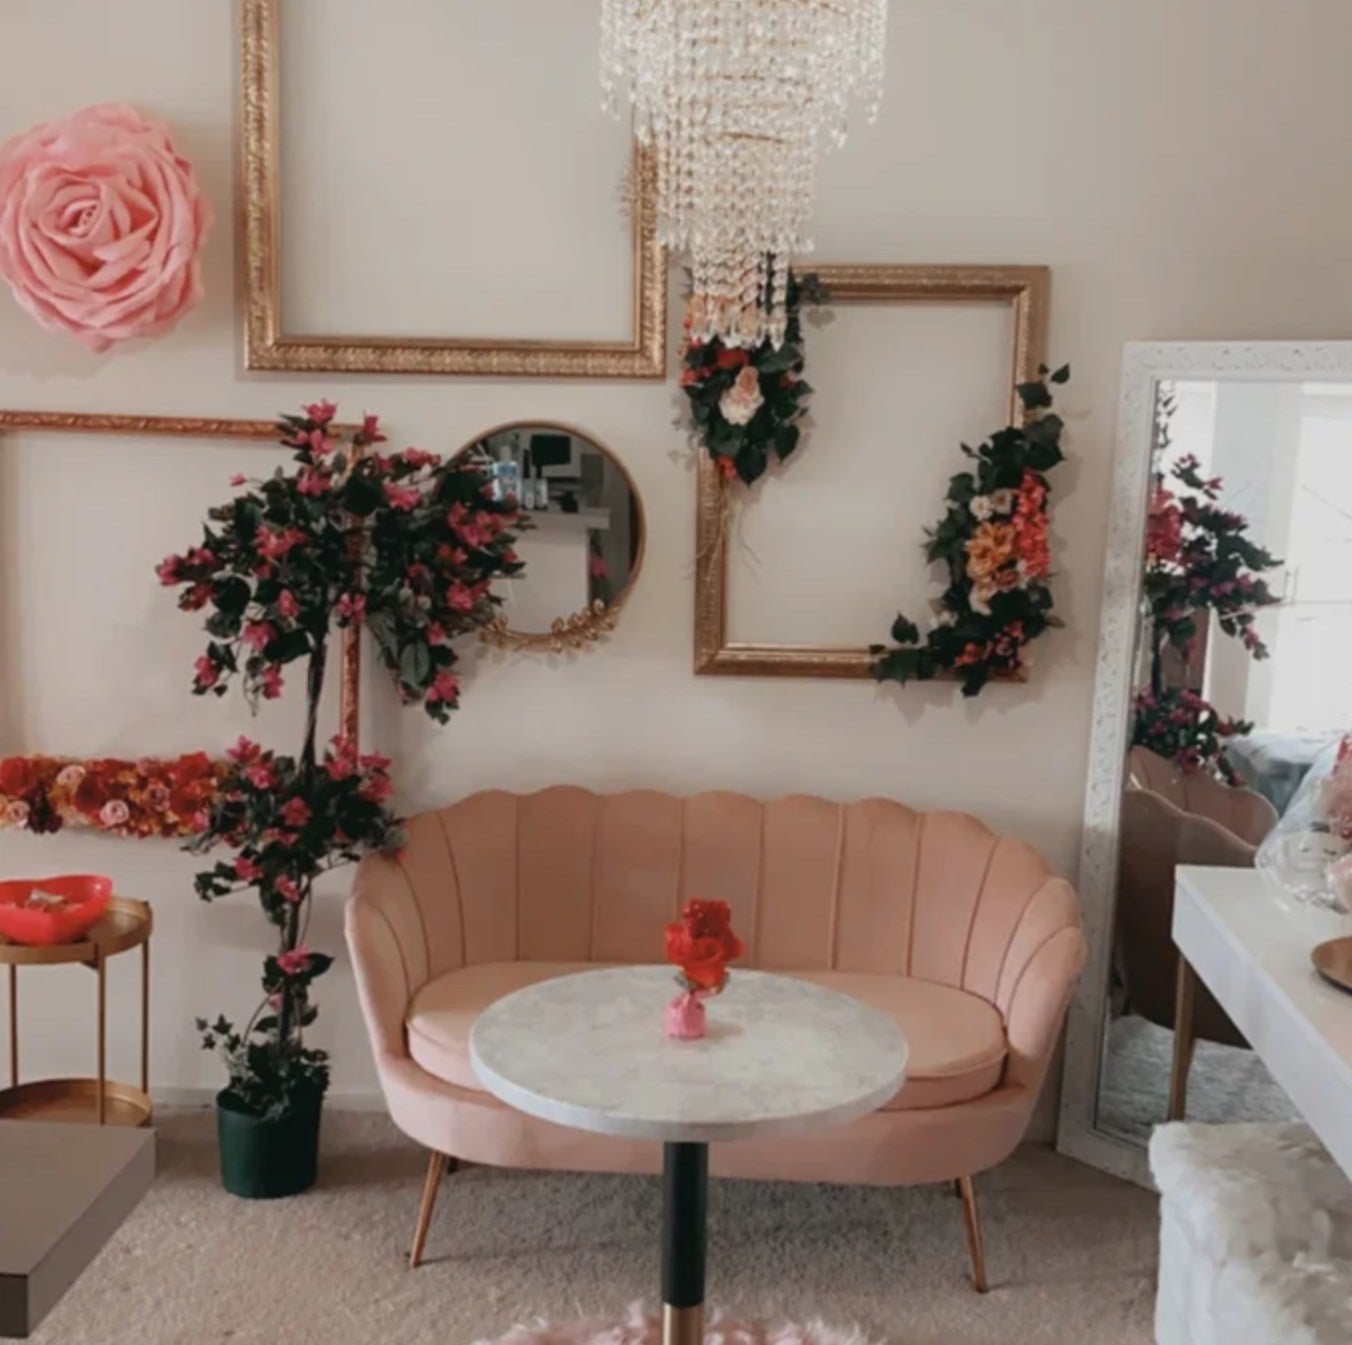 The loveseat in pink